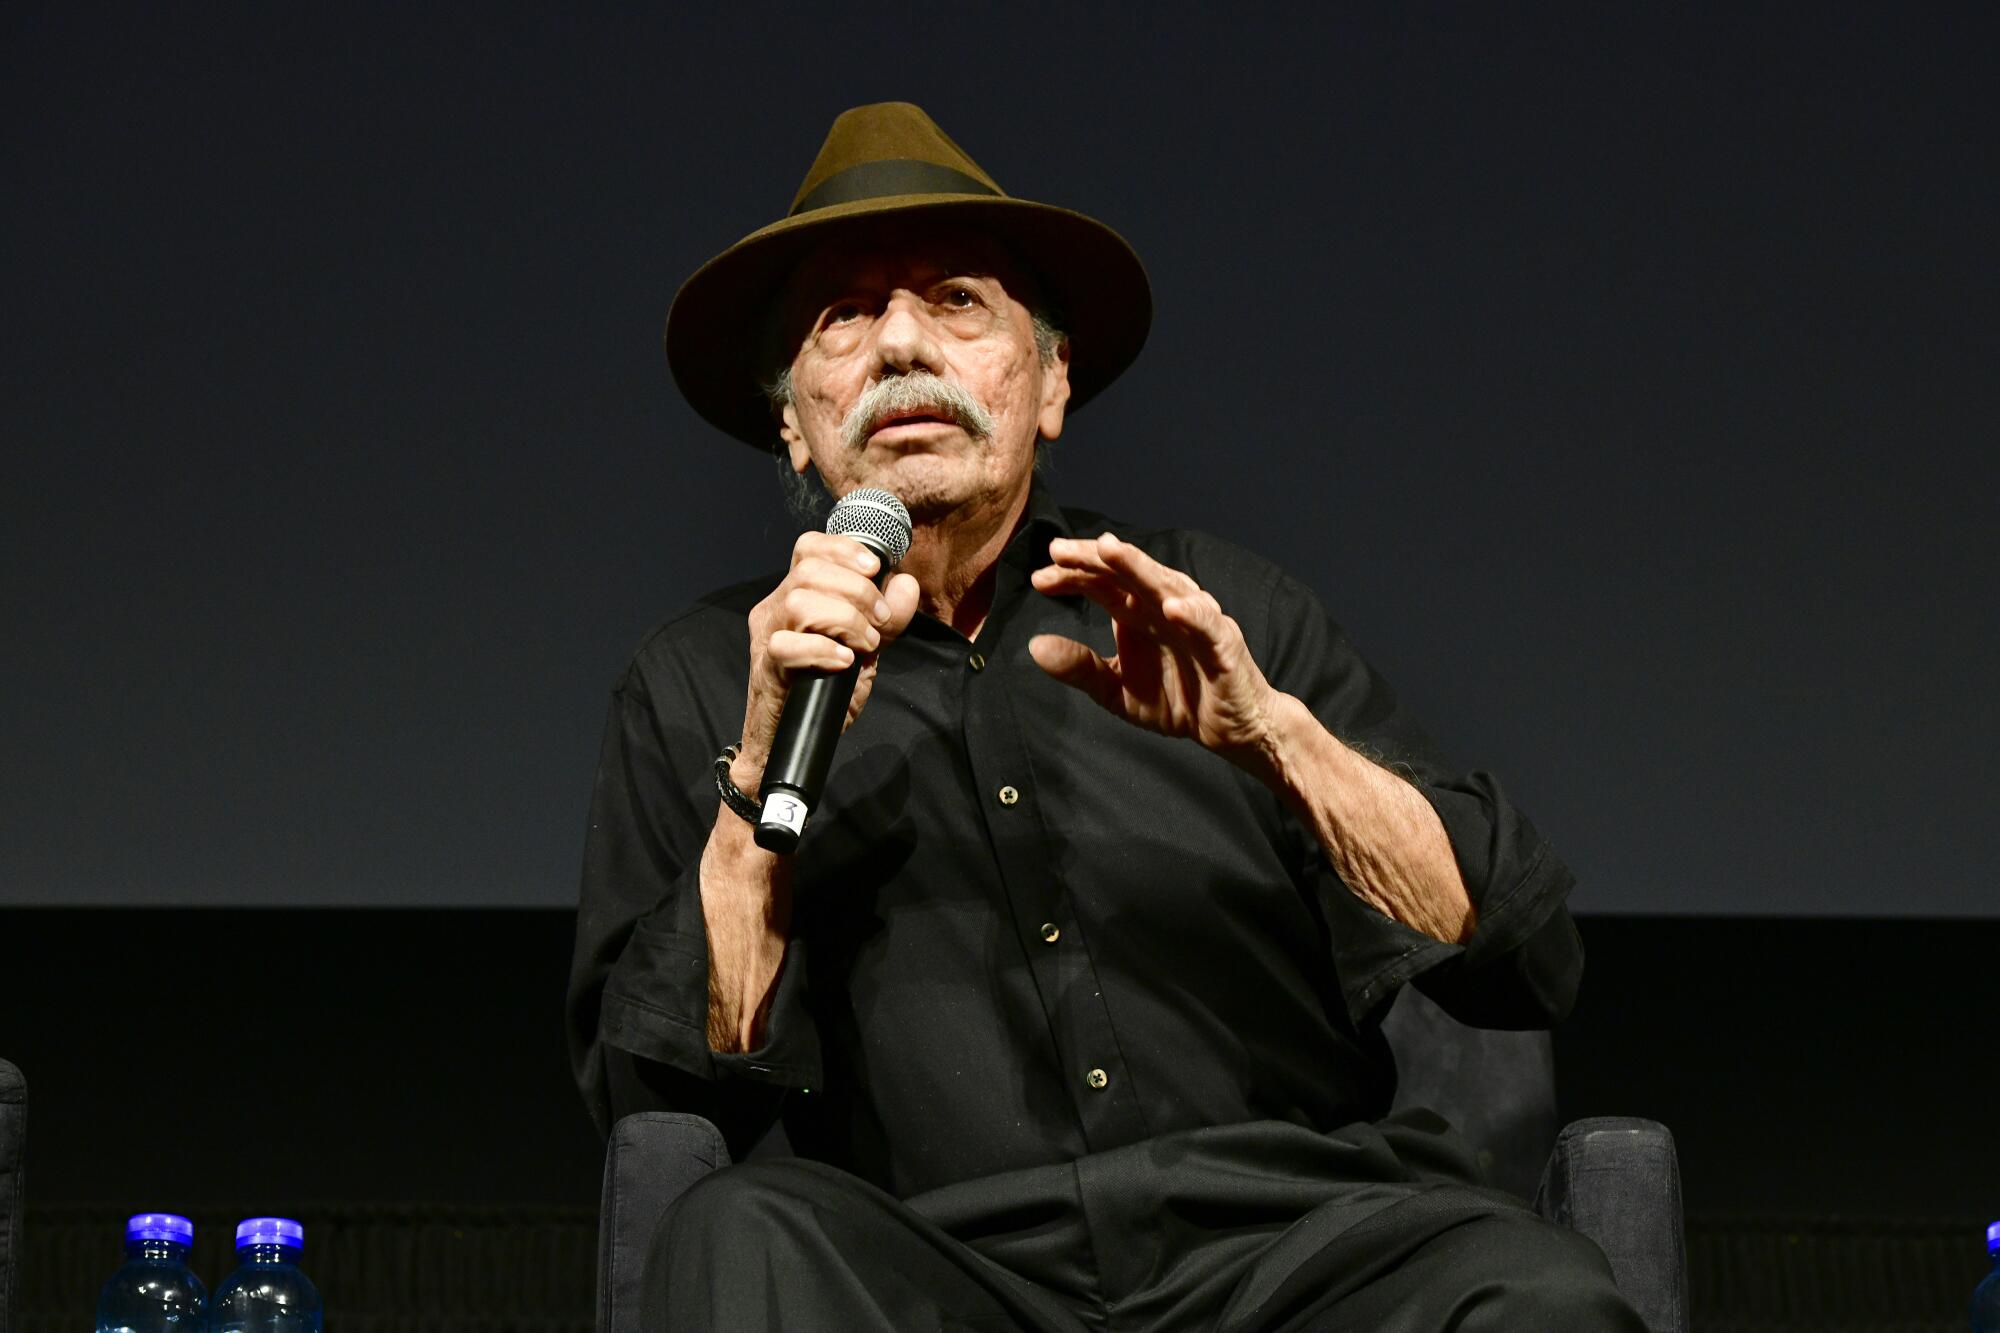 Edward James Olmos sits and holds a microphone